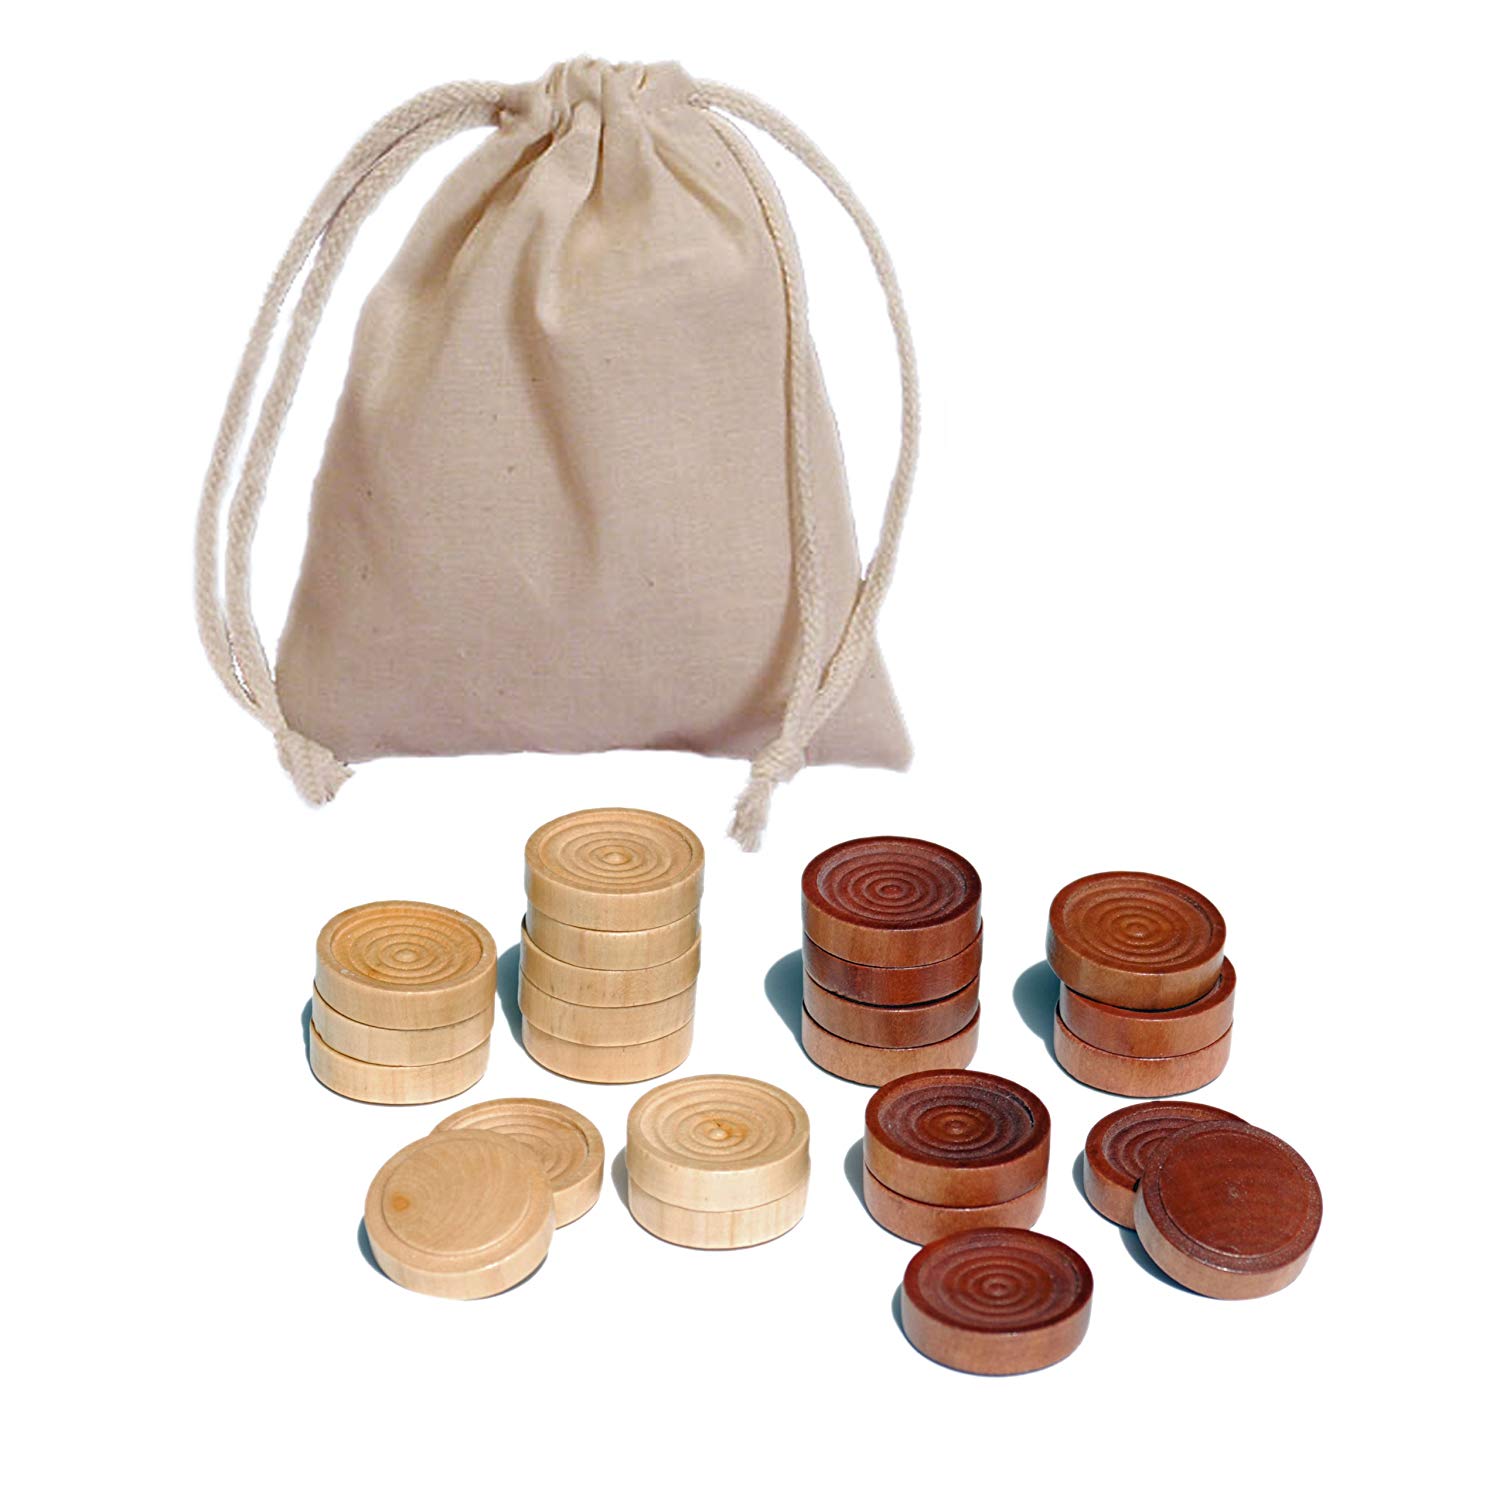 Wood Backgammon Chips with Cloth Pouch - Brown & Natural 1 in. Wooden backgammon chips near silk bag. Backgammon chips dark brown and white chips.